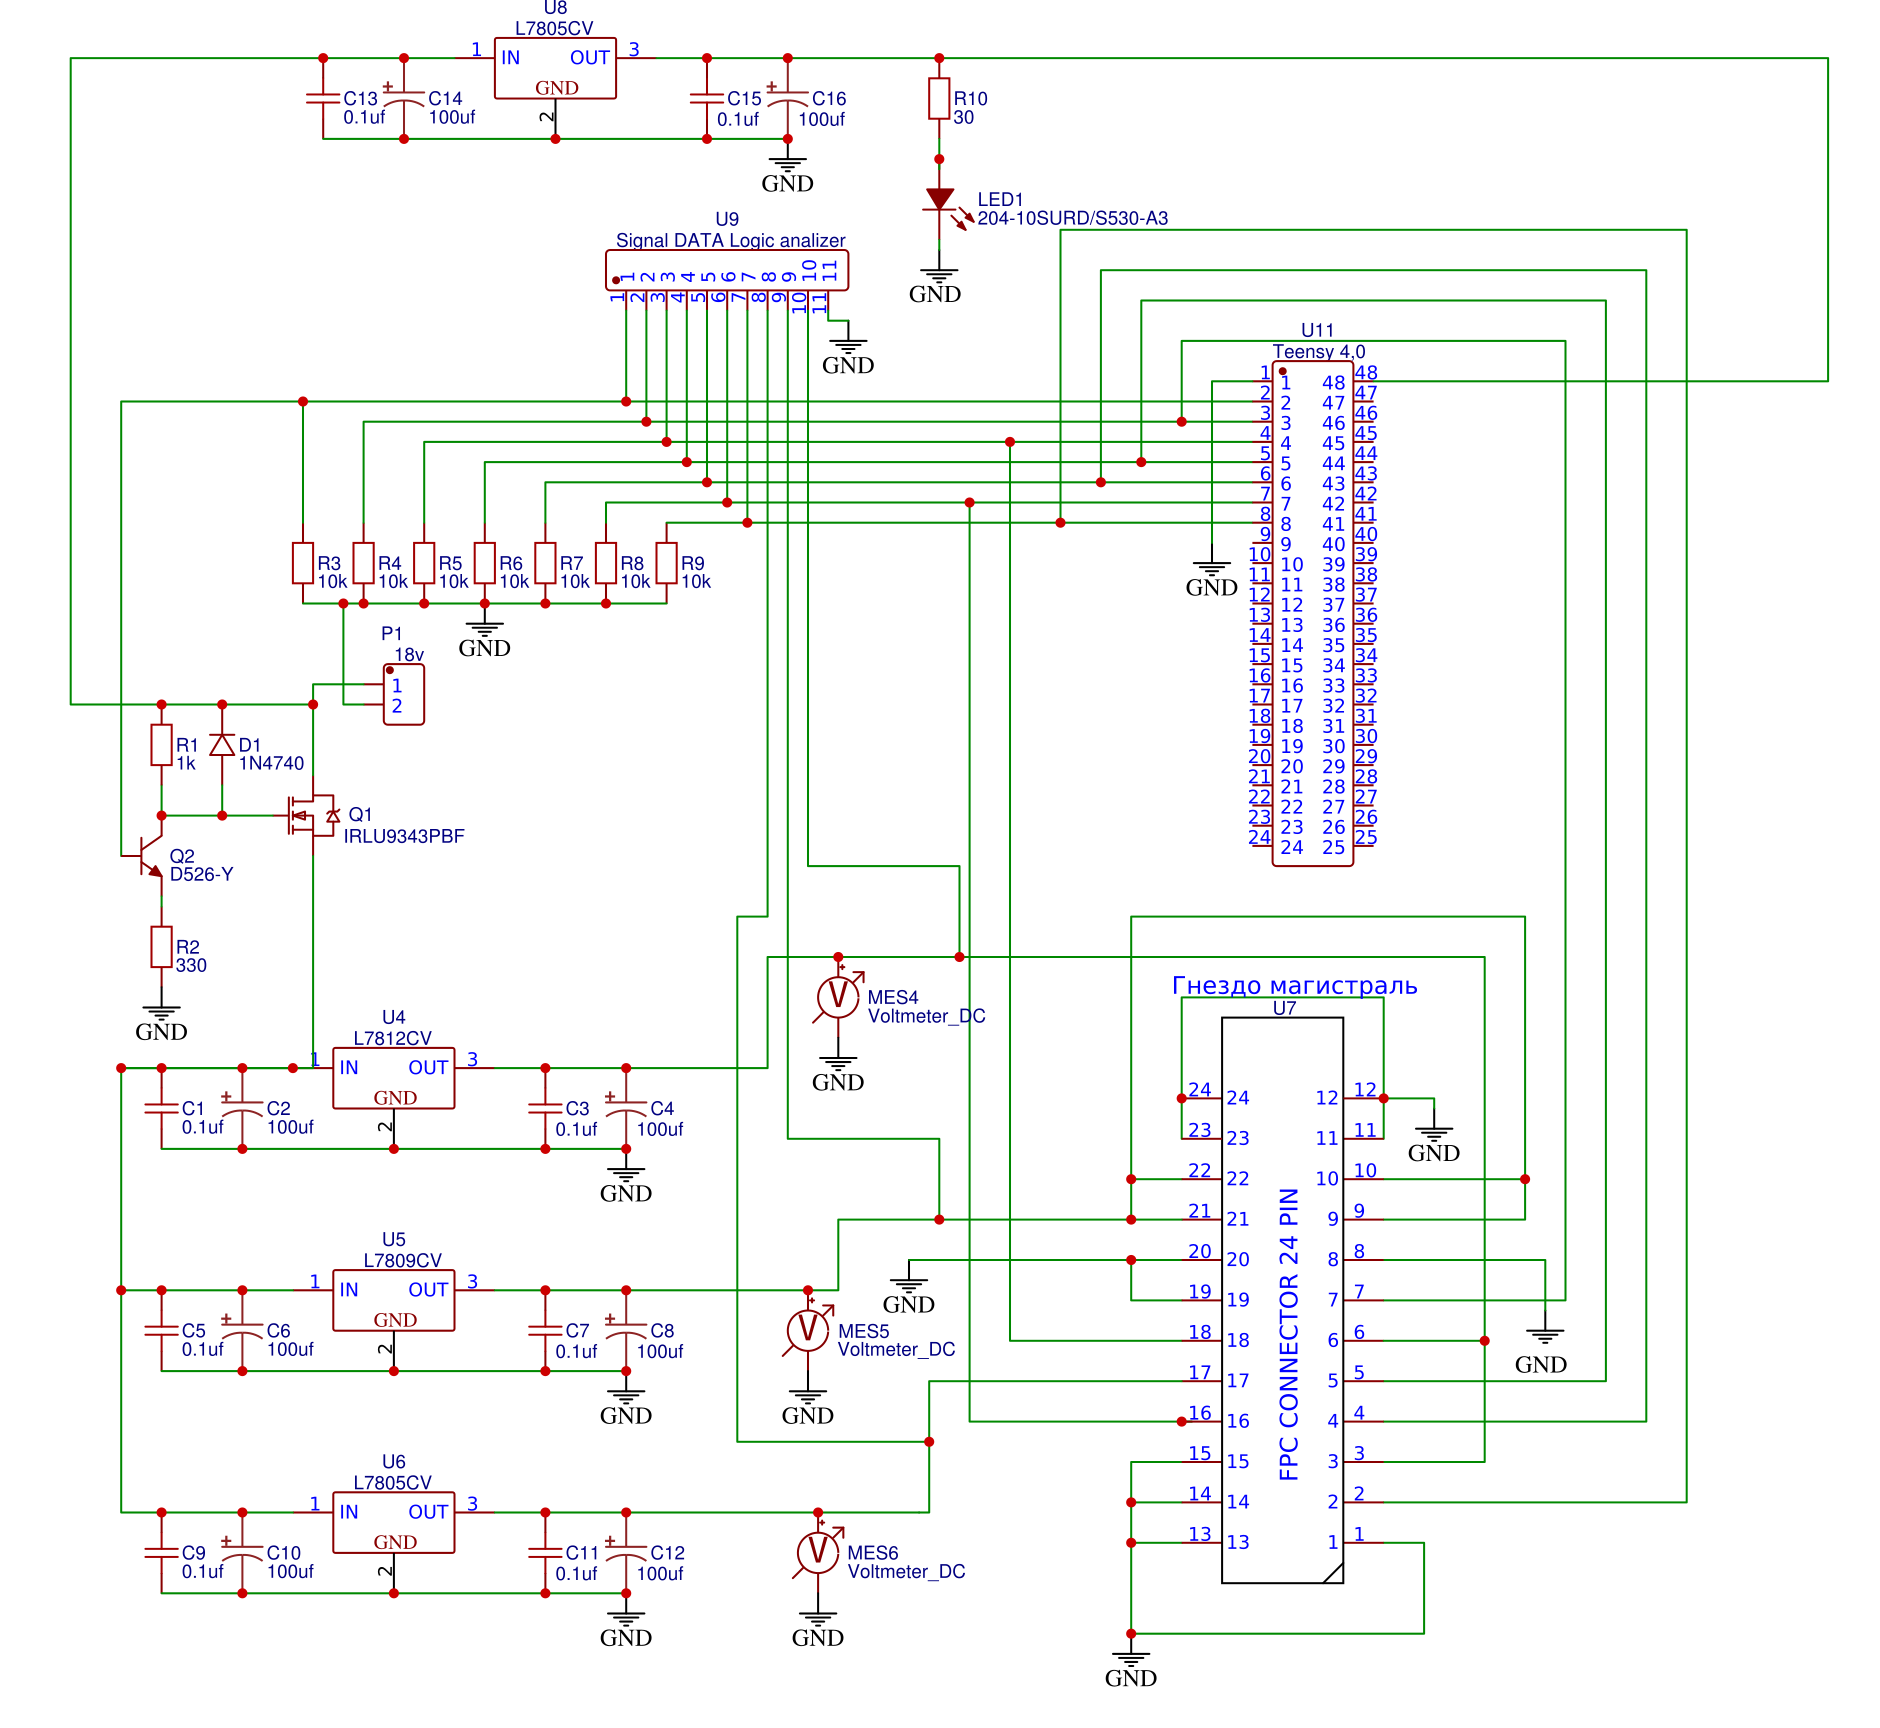 Schematic_84_Sheet-1_20191215140108.png